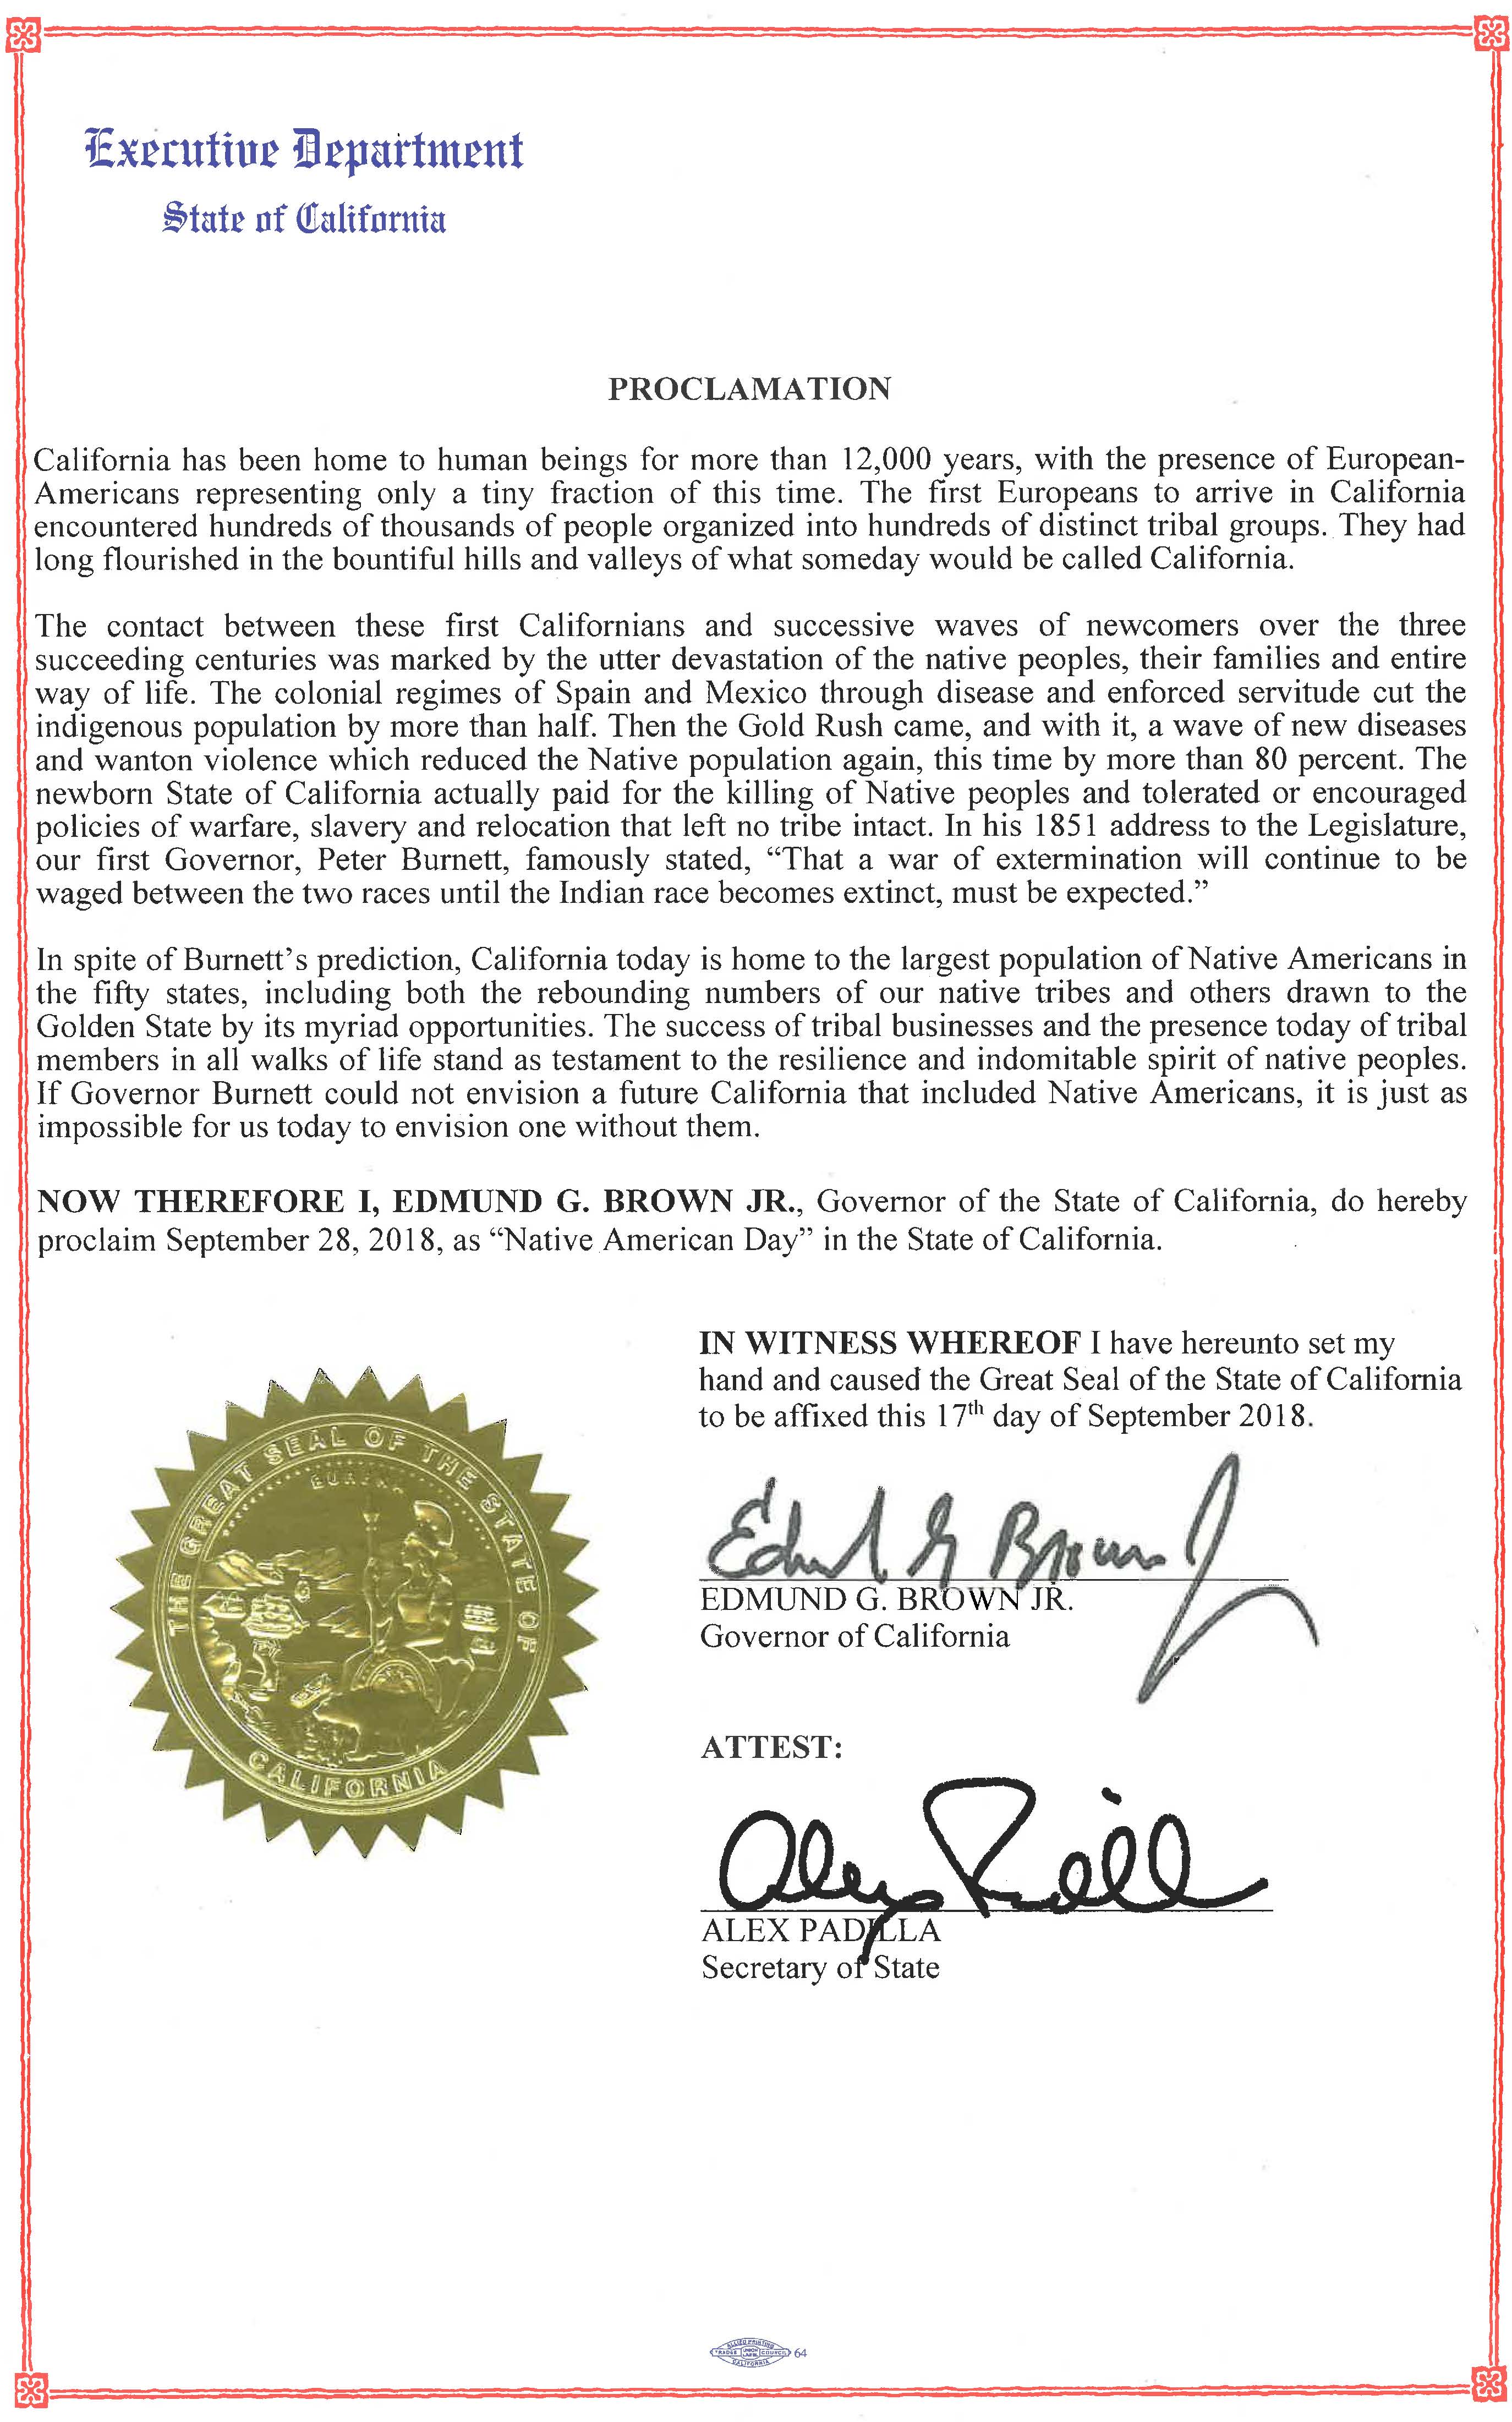 Governor Brown Issues Proclamation Declaring Native American Day